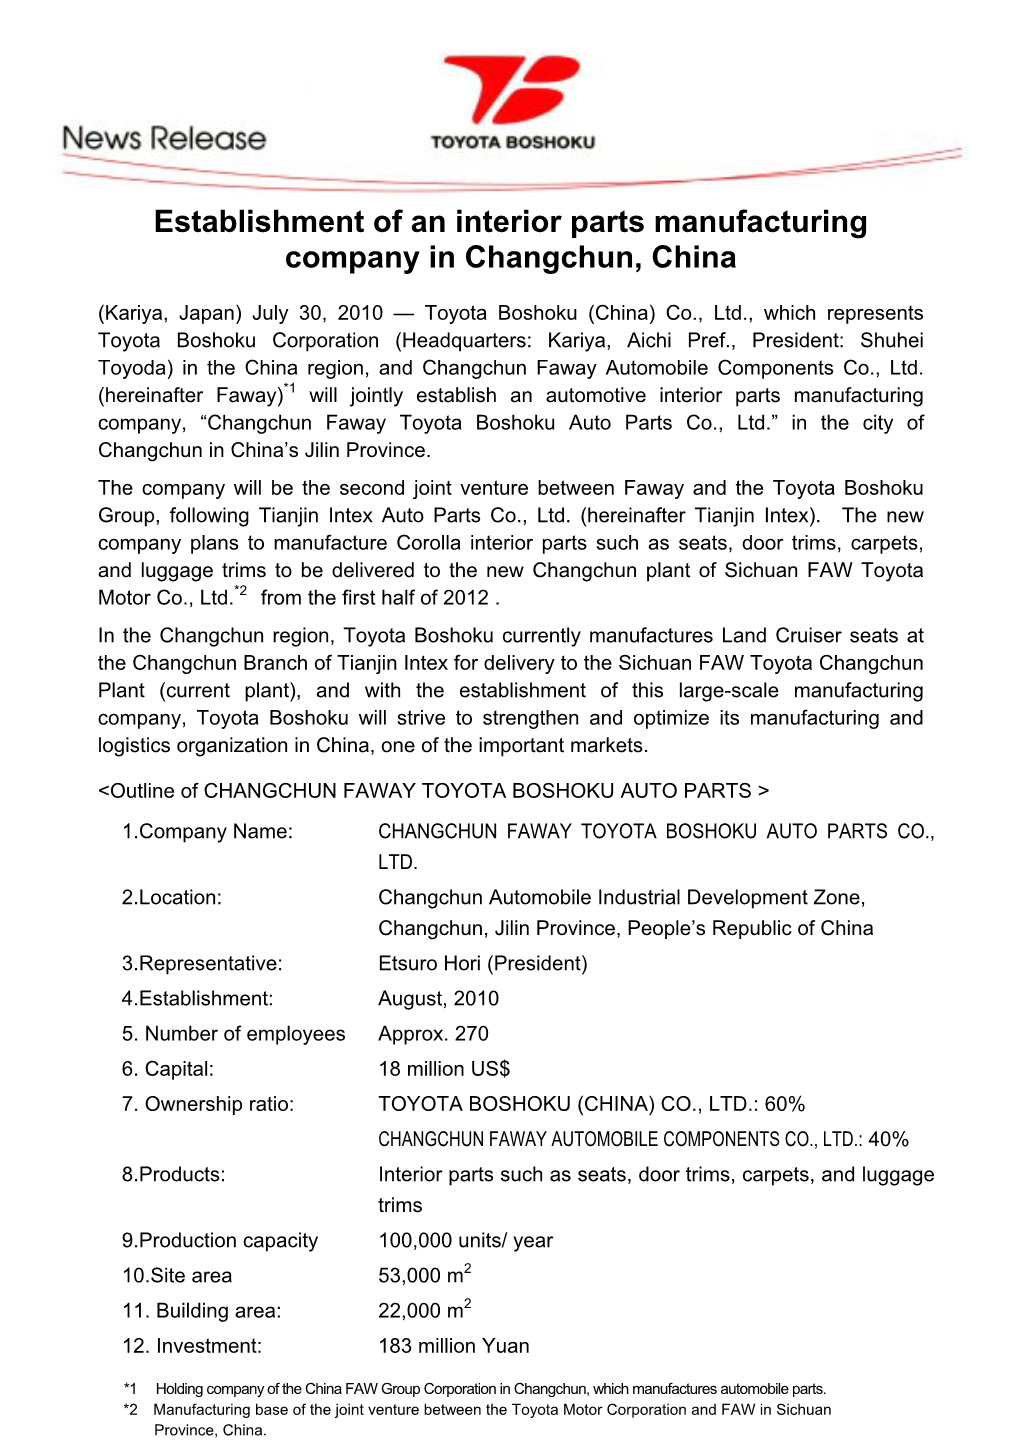 Establishment of an Interior Parts Manufacturing Company in Changchun, China